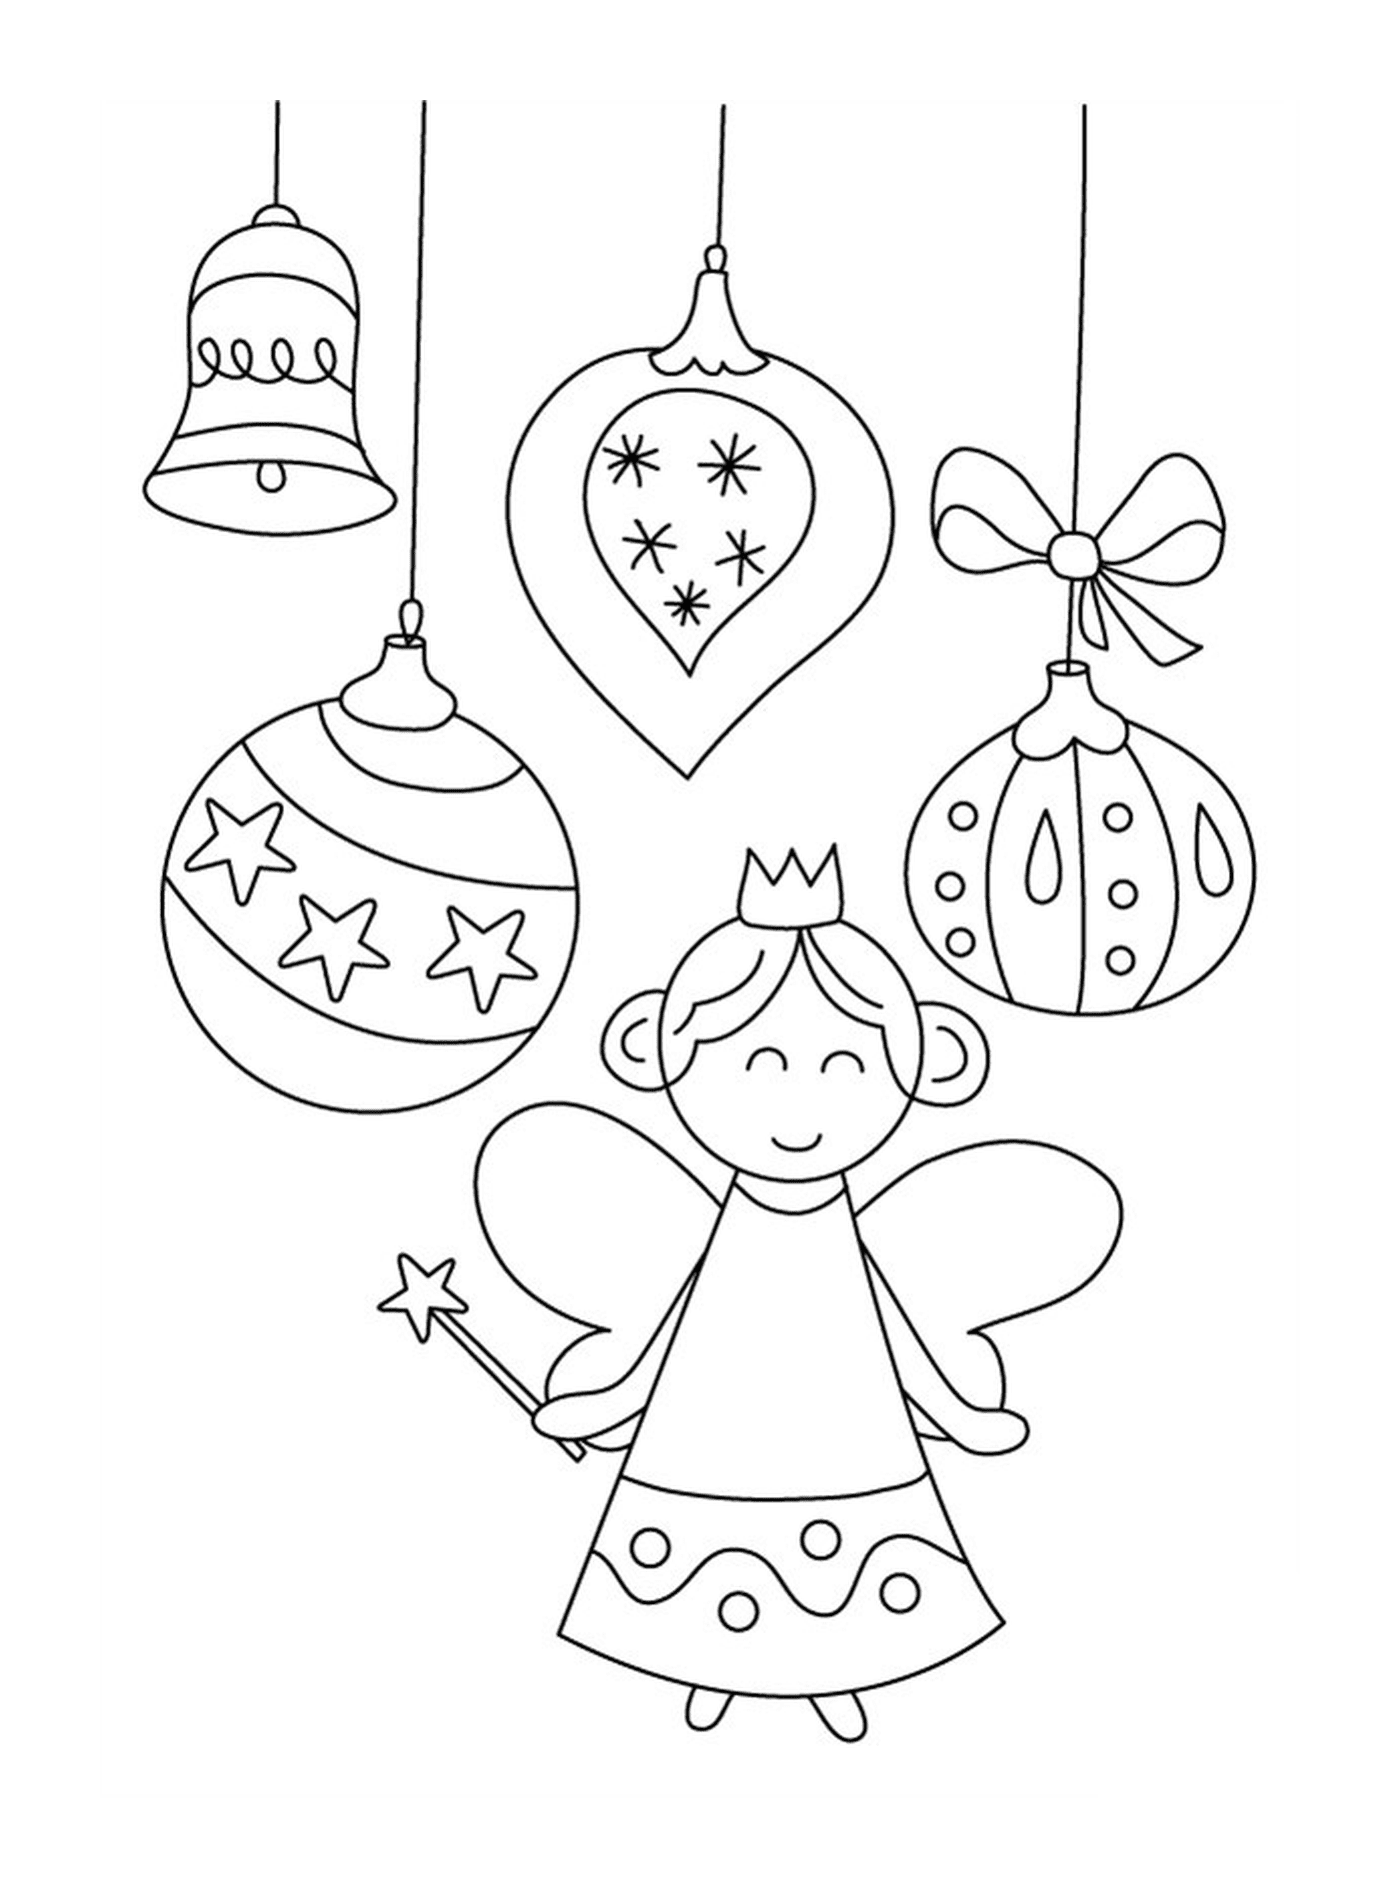  A fairy and Christmas ornaments 